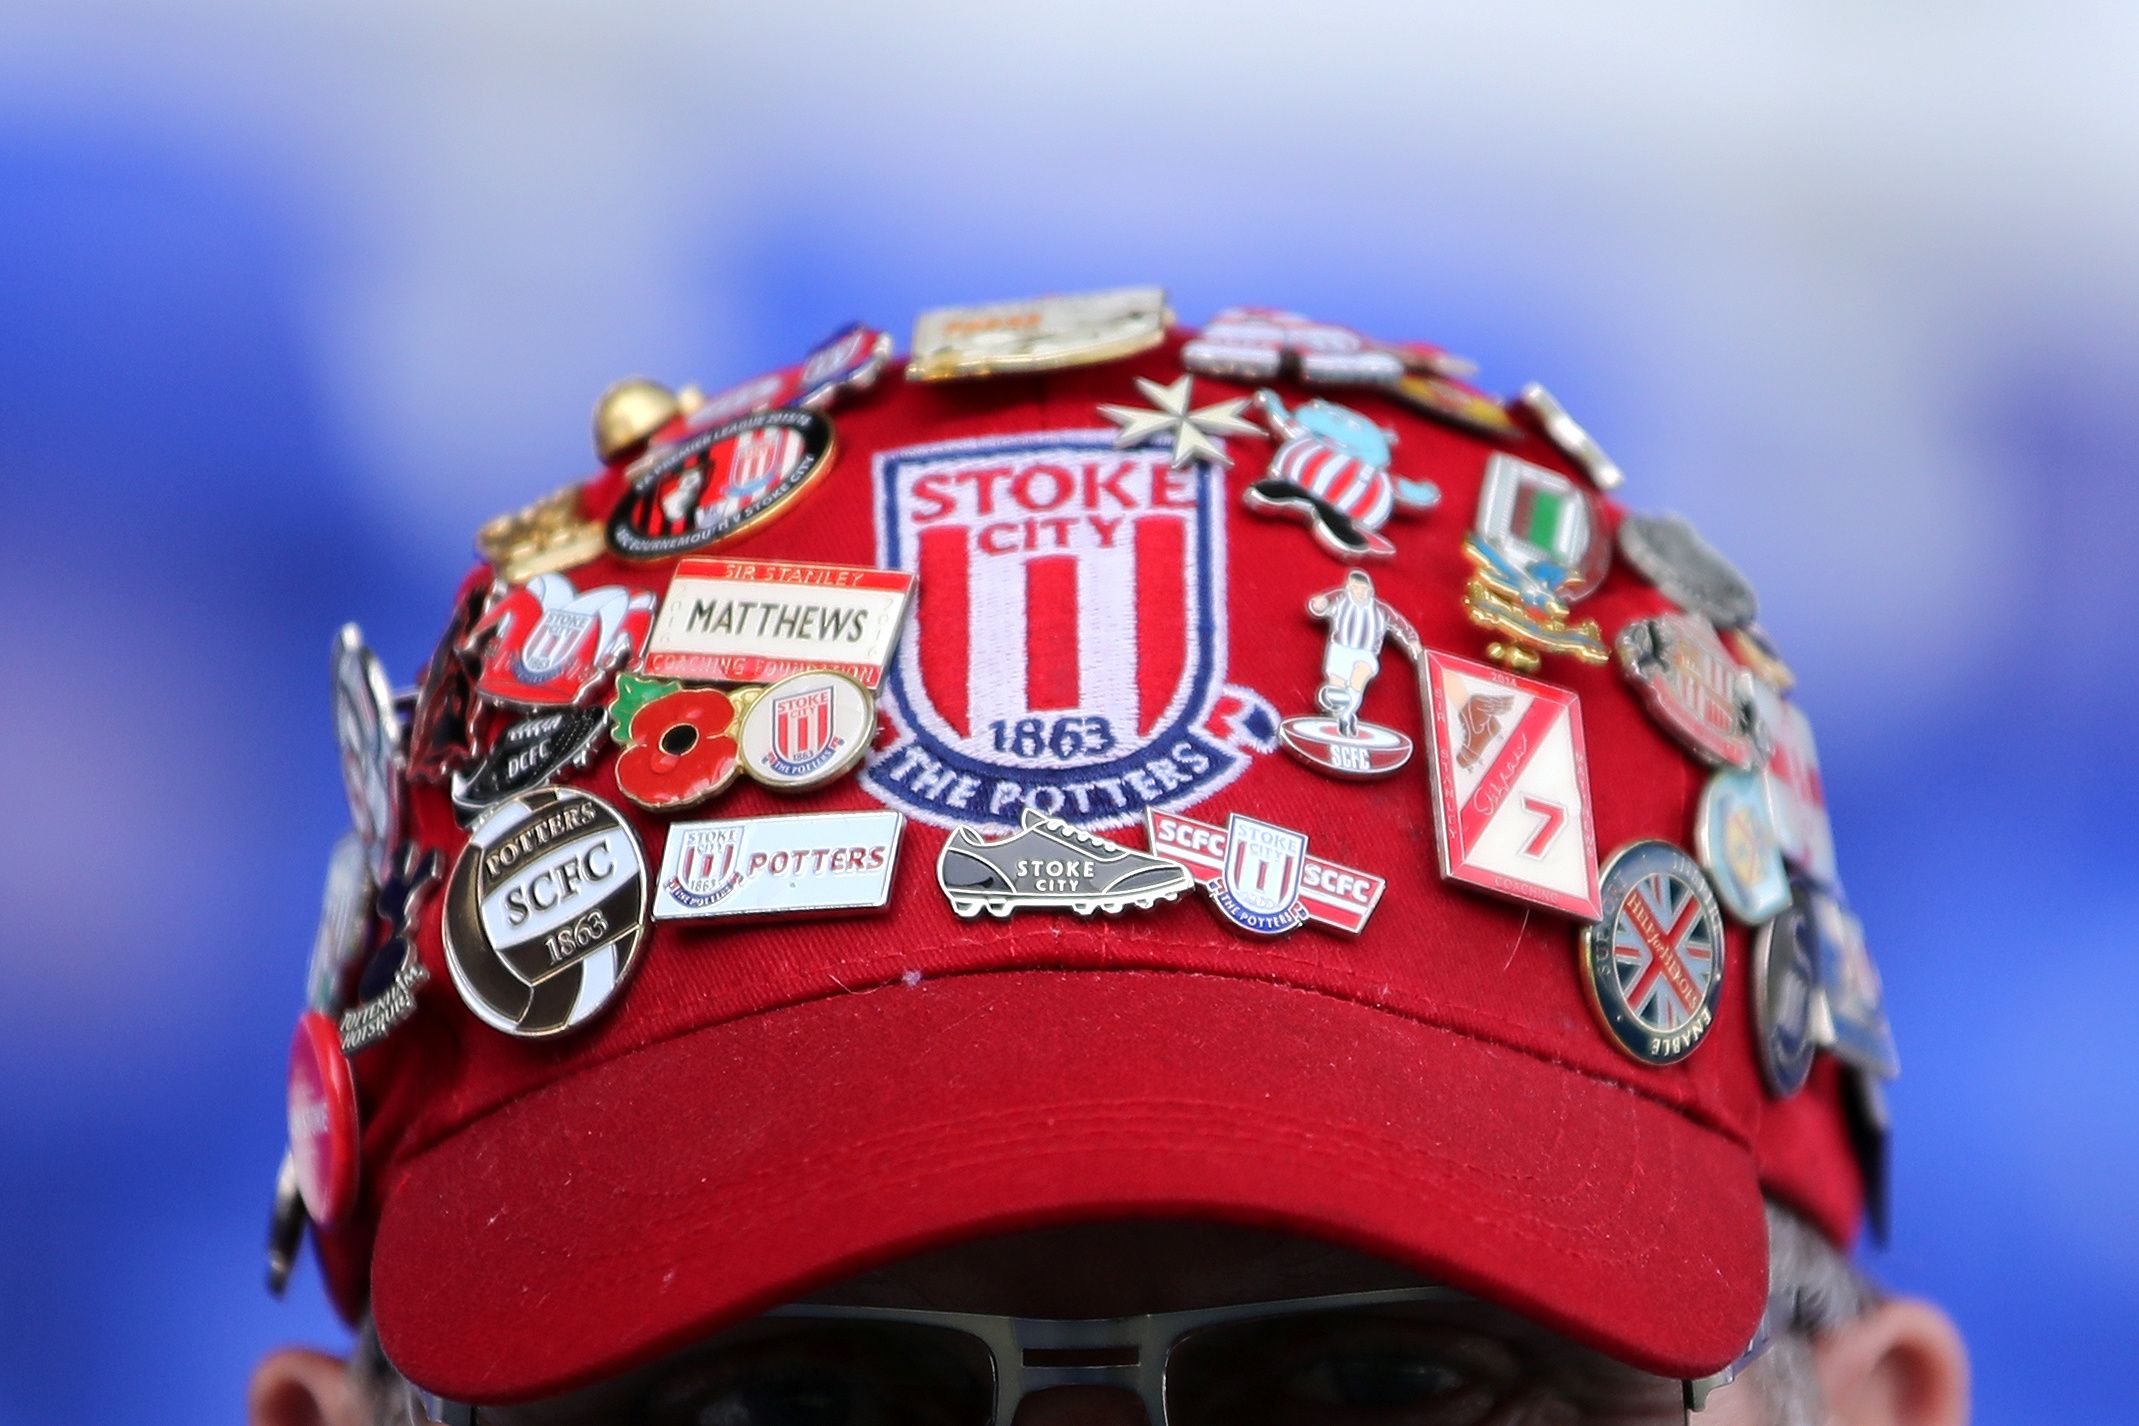 Soccer Football - Championship - Birmingham City v Stoke City - St Andrew's, Birmingham, Britain - August 31, 2019   General view of a Stoke City fans cap with badges before the match    Action Images/Molly Darlington    EDITORIAL USE ONLY. No use with unauthorized audio, video, data, fixture lists, club/league logos or 